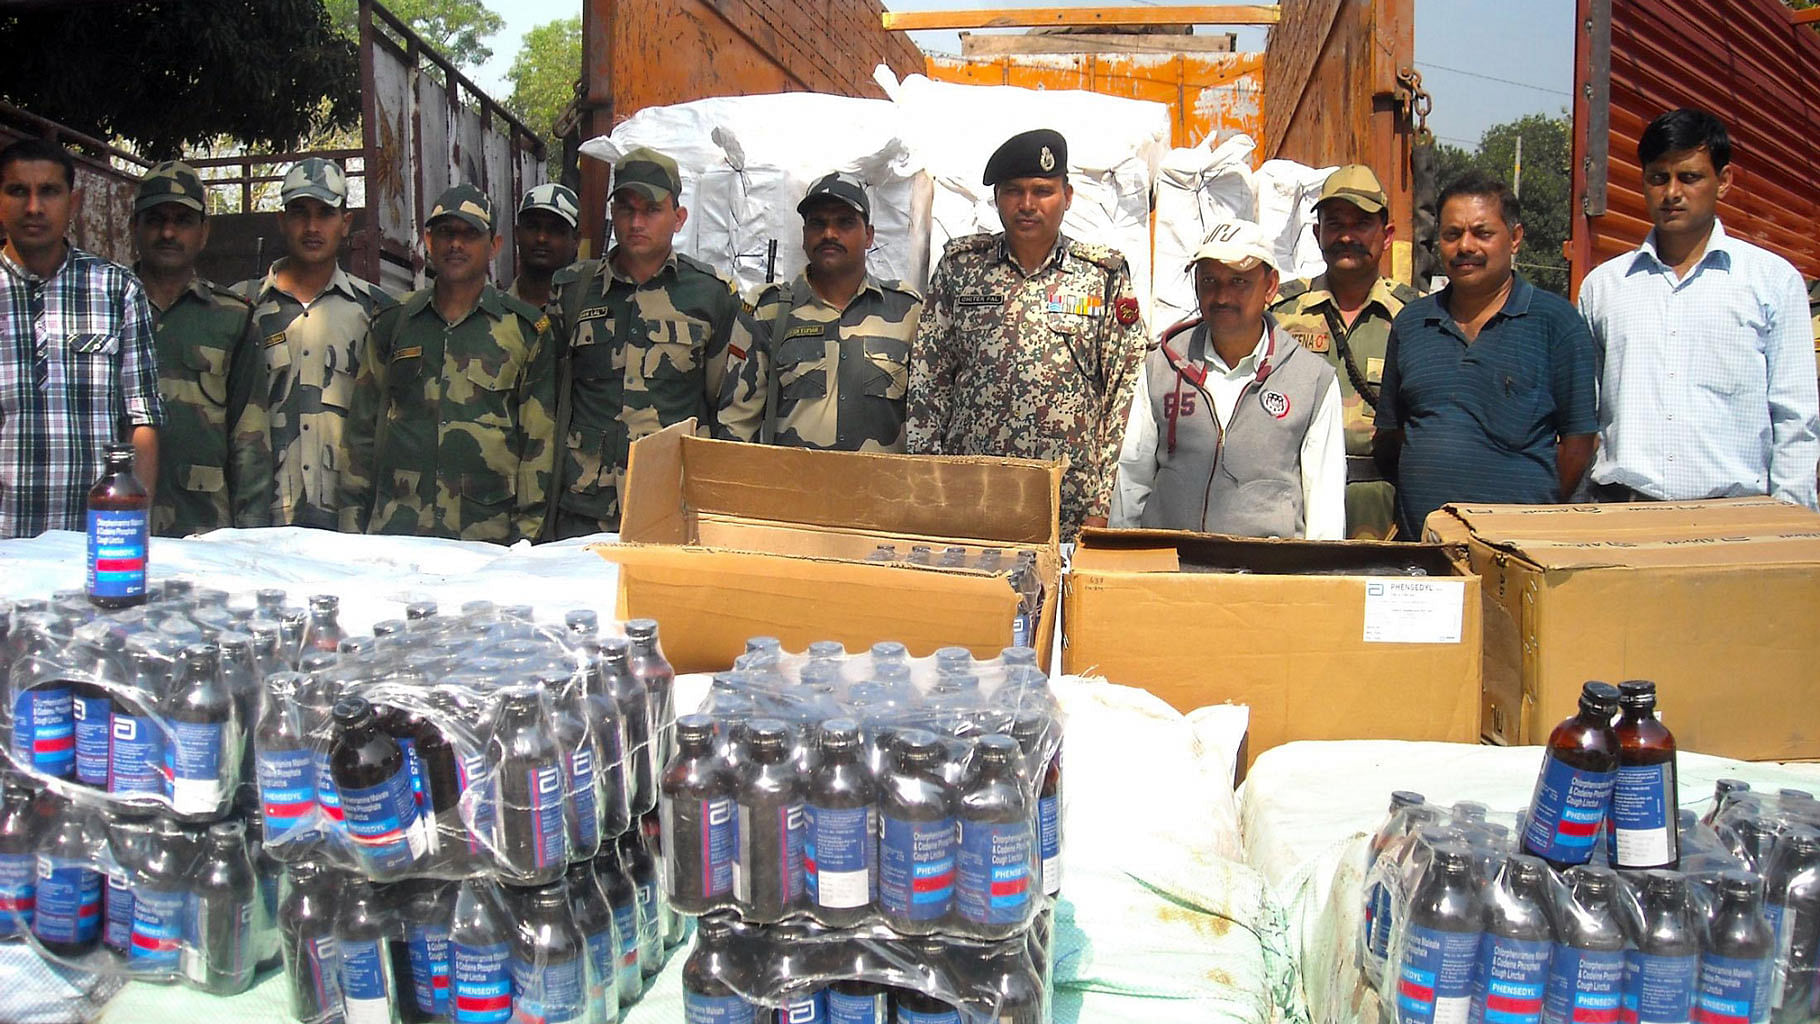 BSF officials present before press cough syrup bottles worth Rs One crore that were seized from Bhagalpur border outpost, near Agartala on 15 March 2015.  (Photo Courtesy: IANS)